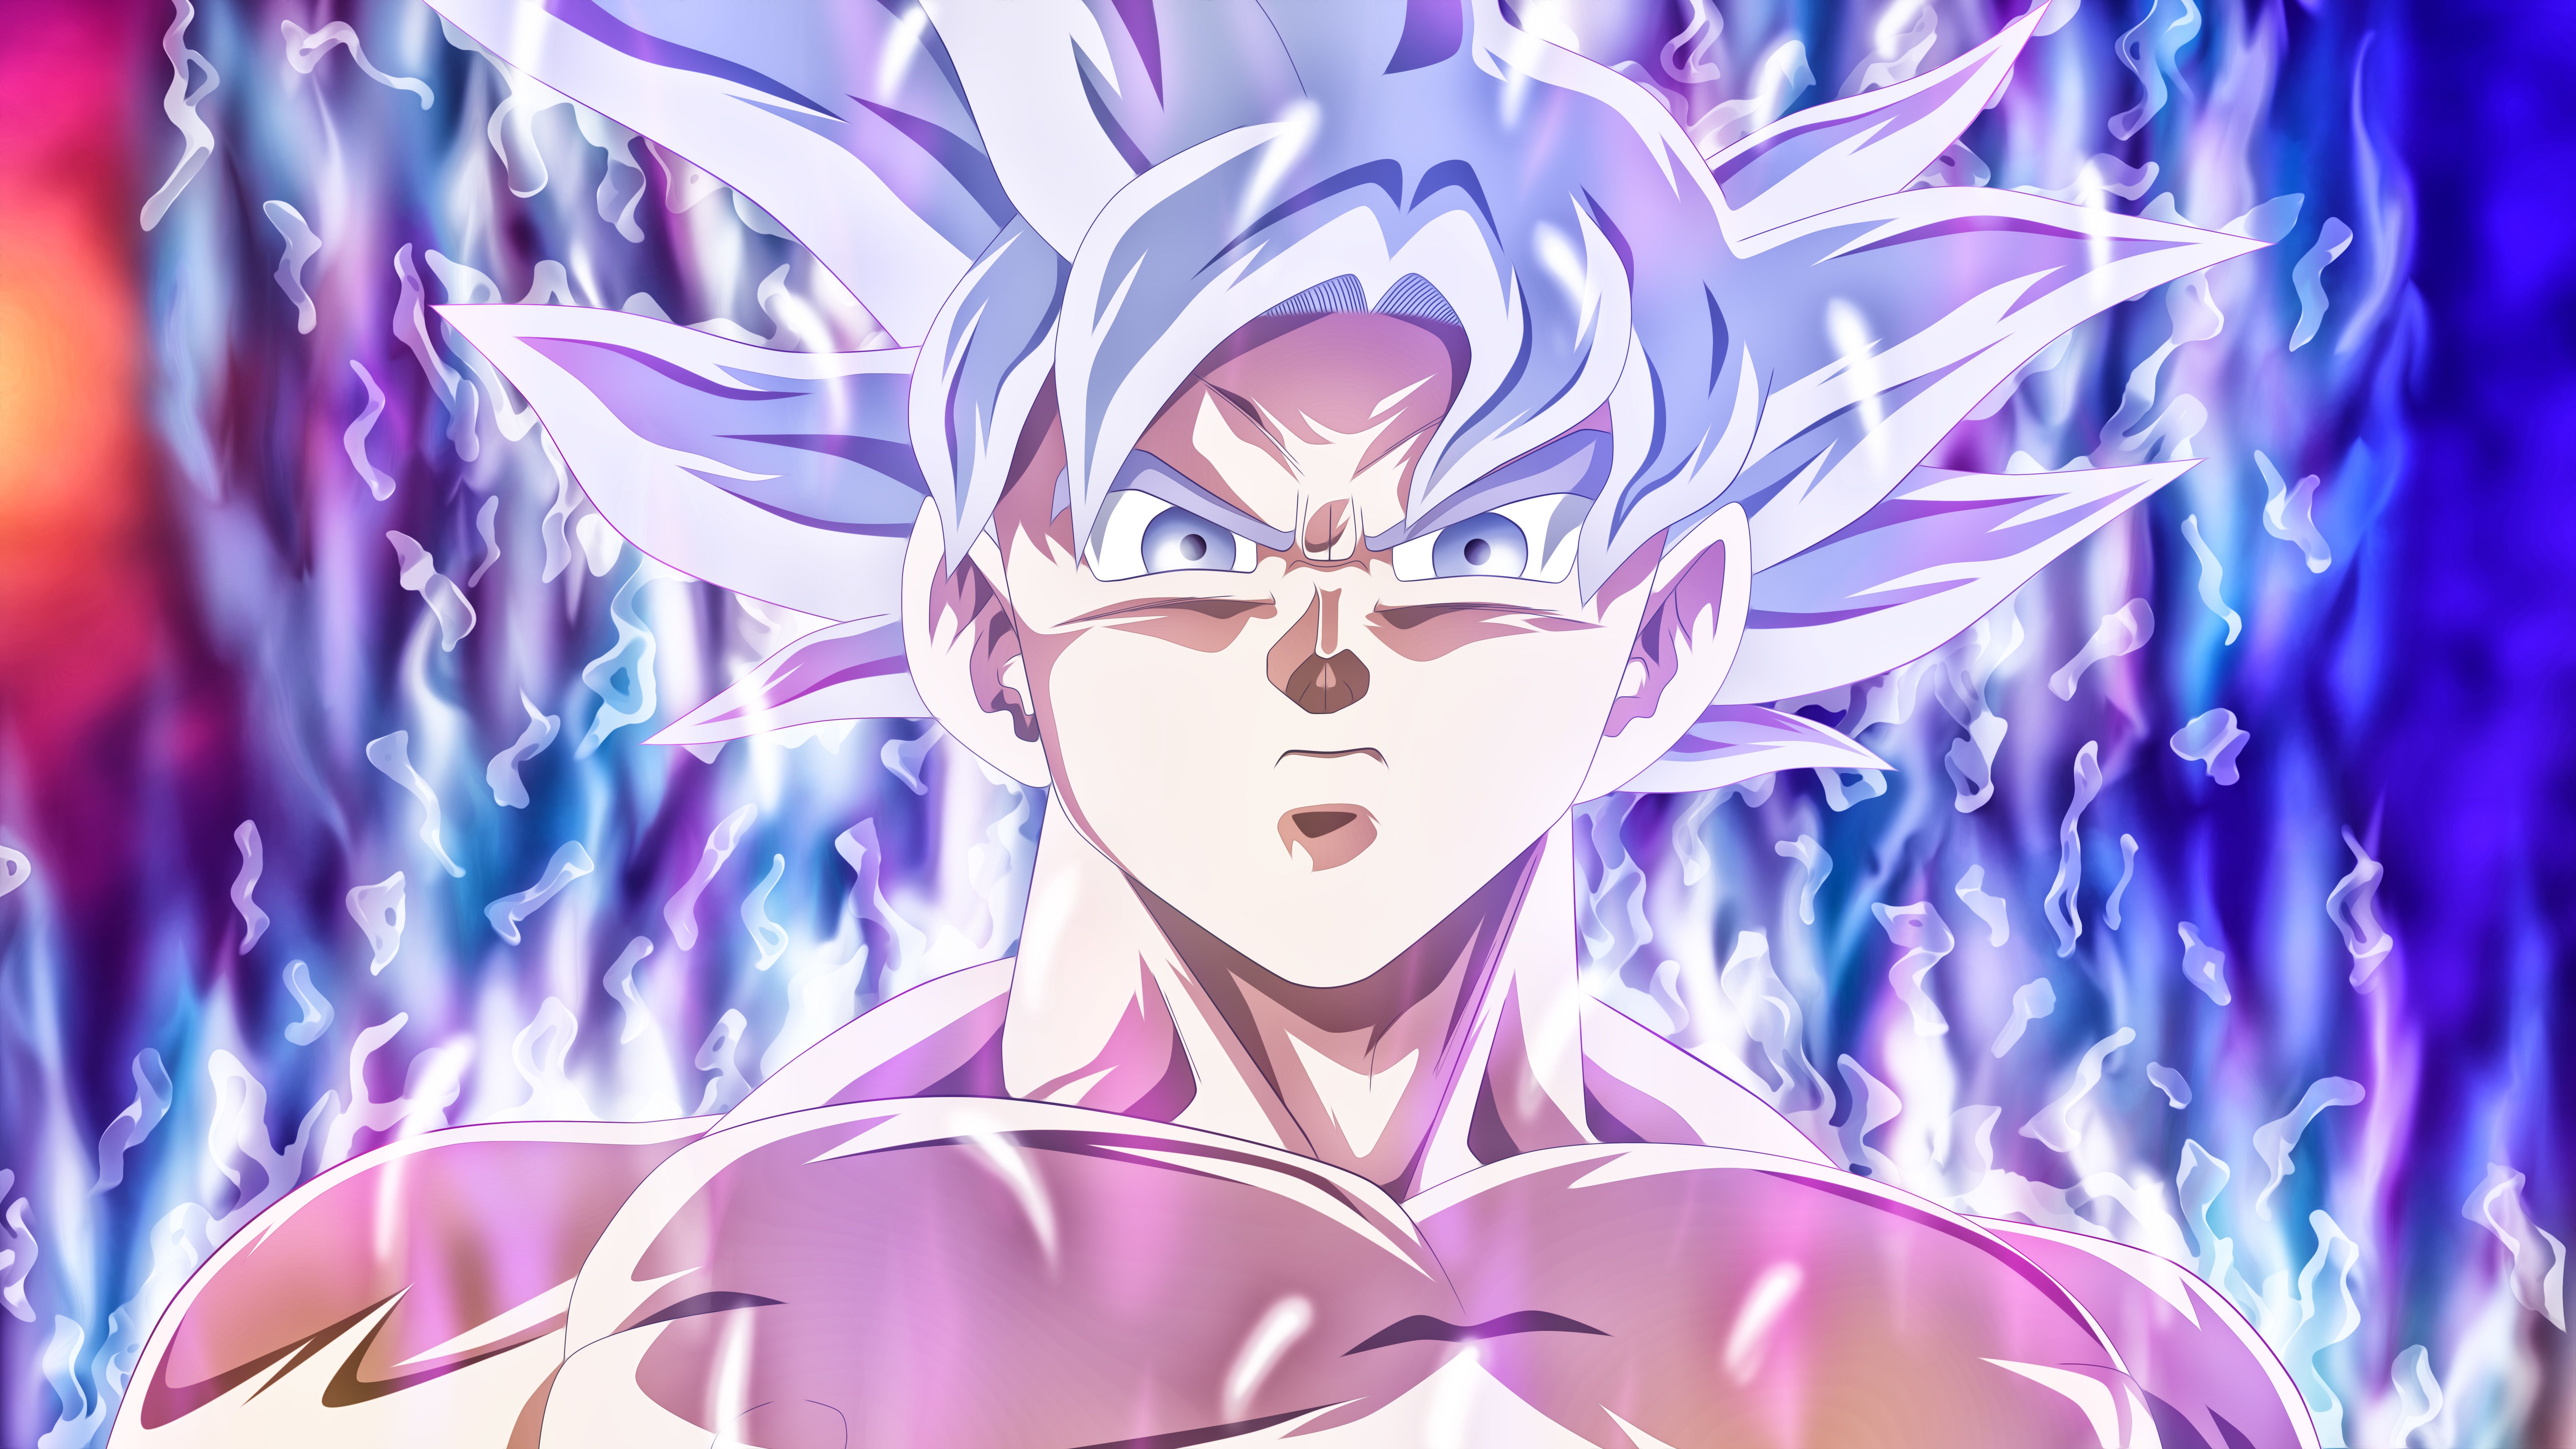 7680x4320 Goku Mastered Ultra Instinct 8k HD 4k Wallpapers, Image, Backgrounds, Photos and Pictures